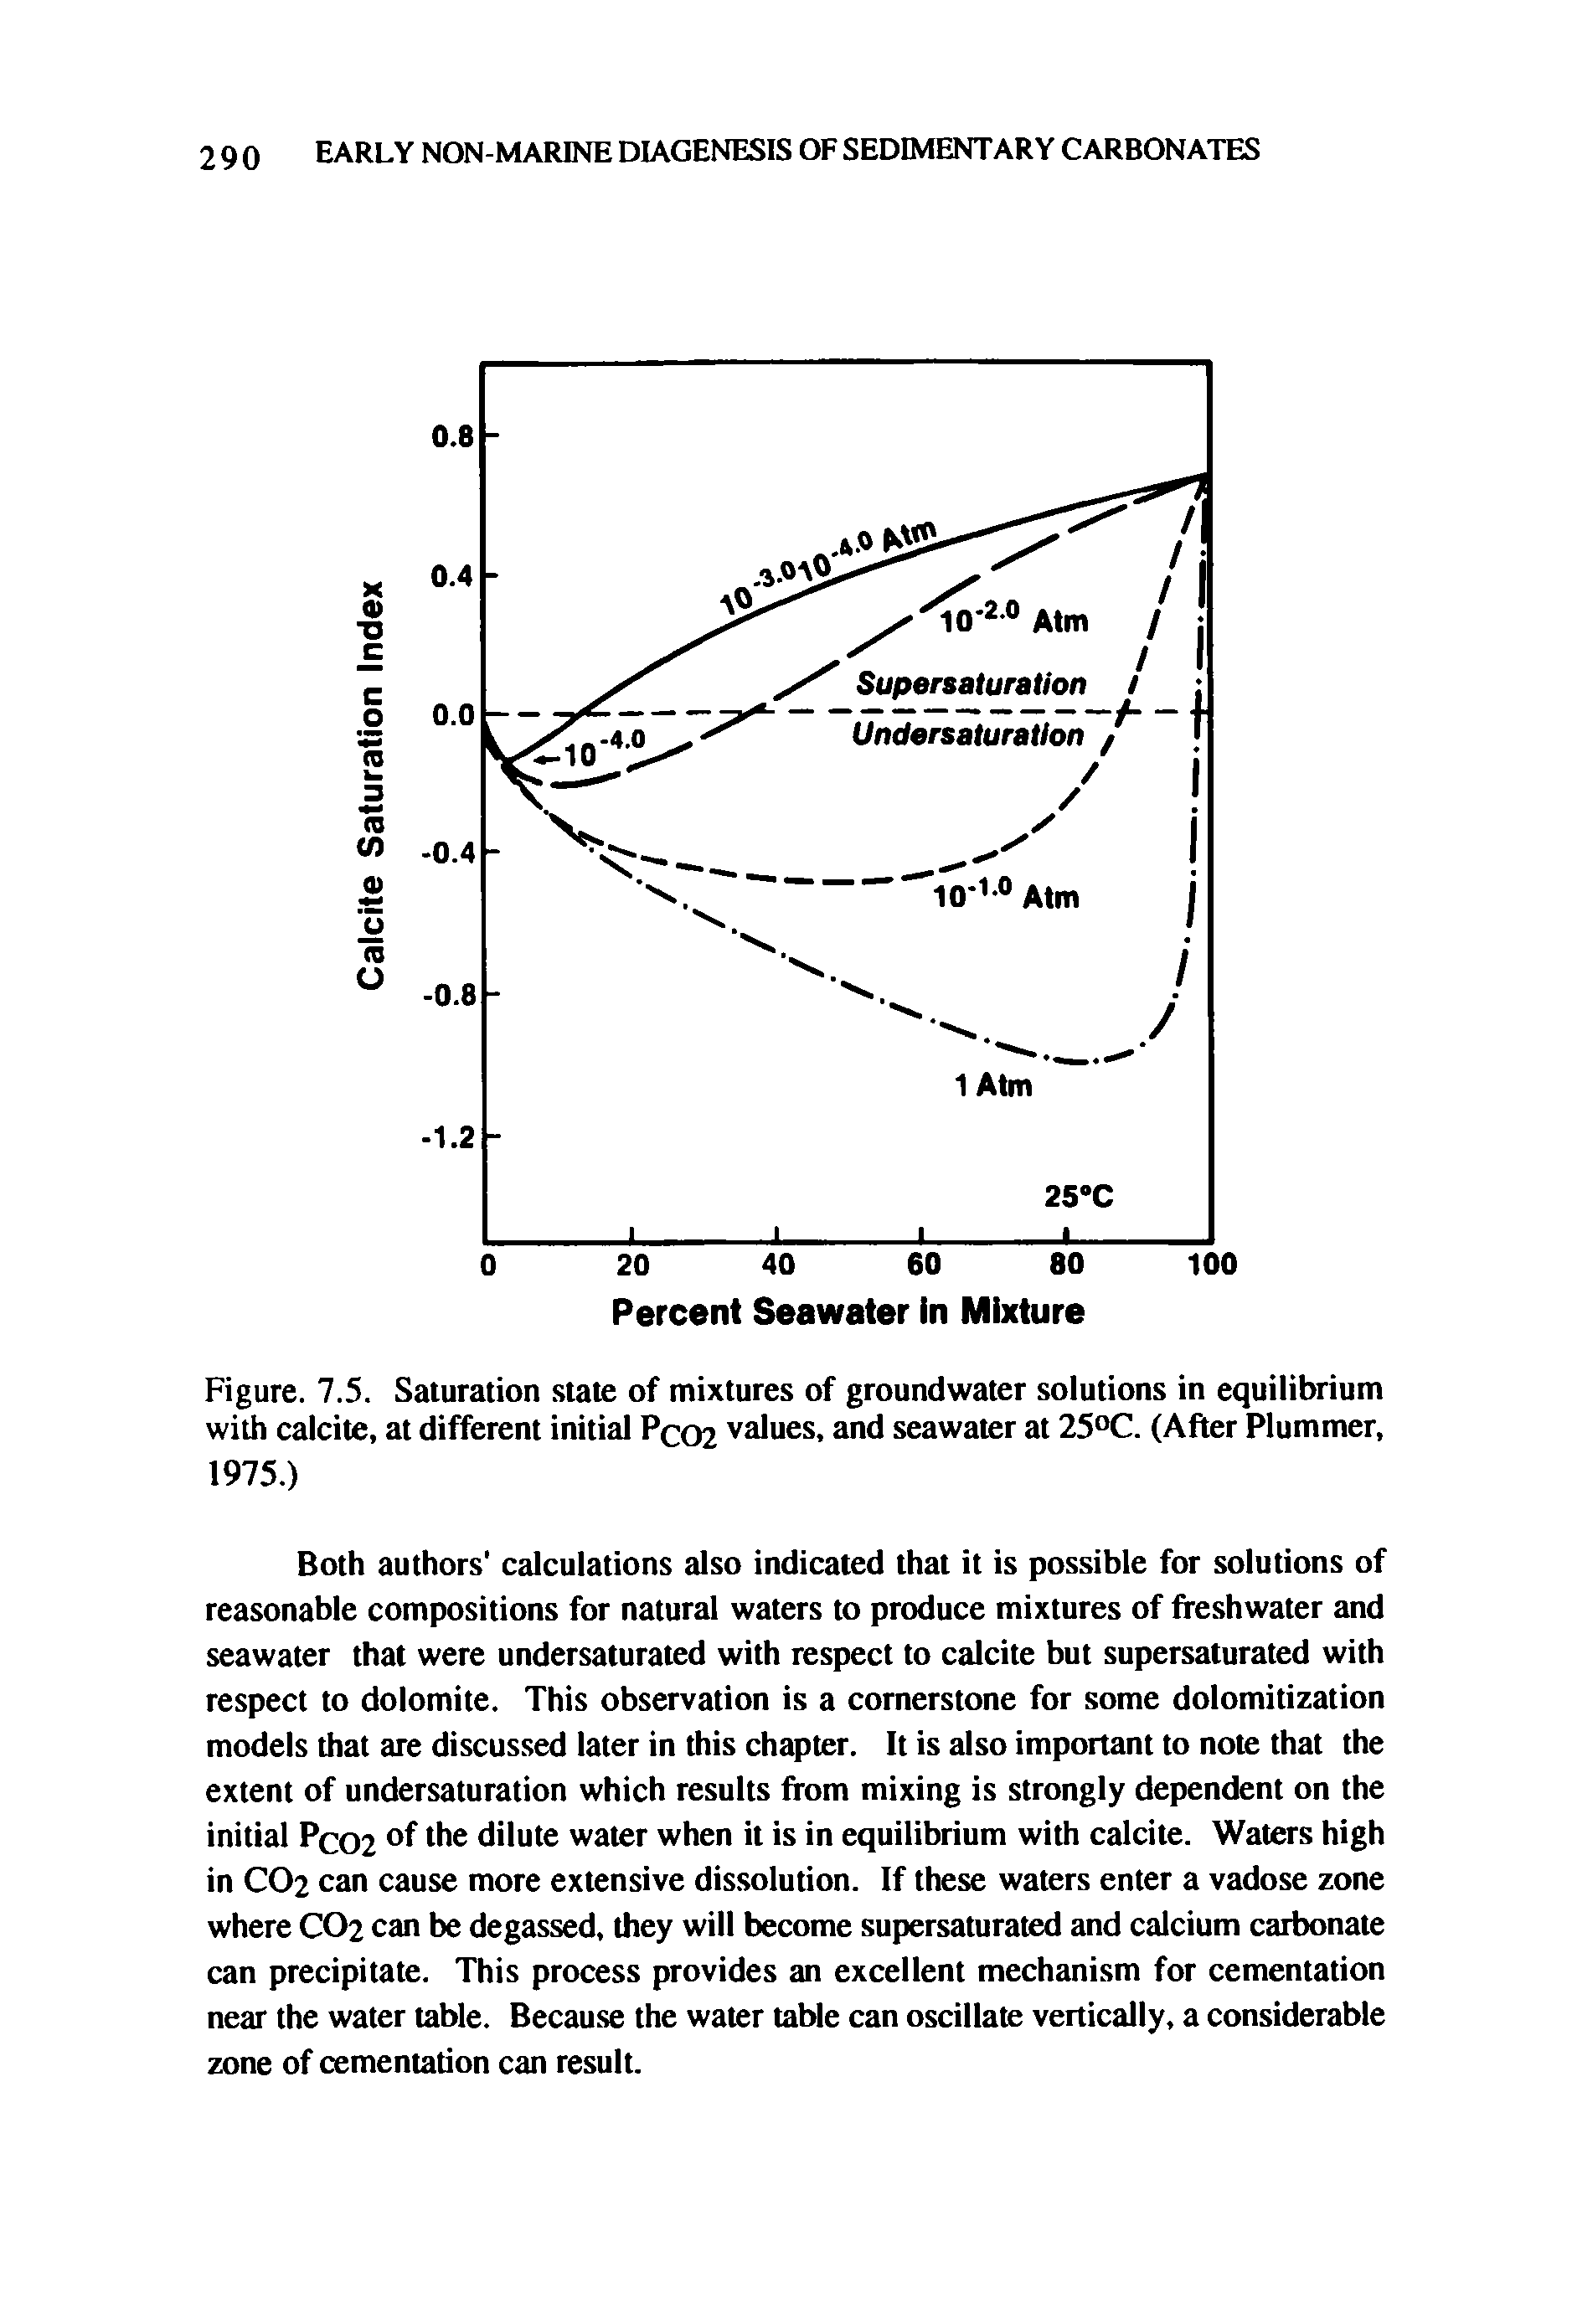 Figure. 7.5. Saturation state of mixtures of groundwater solutions in equilibrium with calcite, at different initial Pc02 values> and seawater at 25°C. (After Plummer, 1975.)...